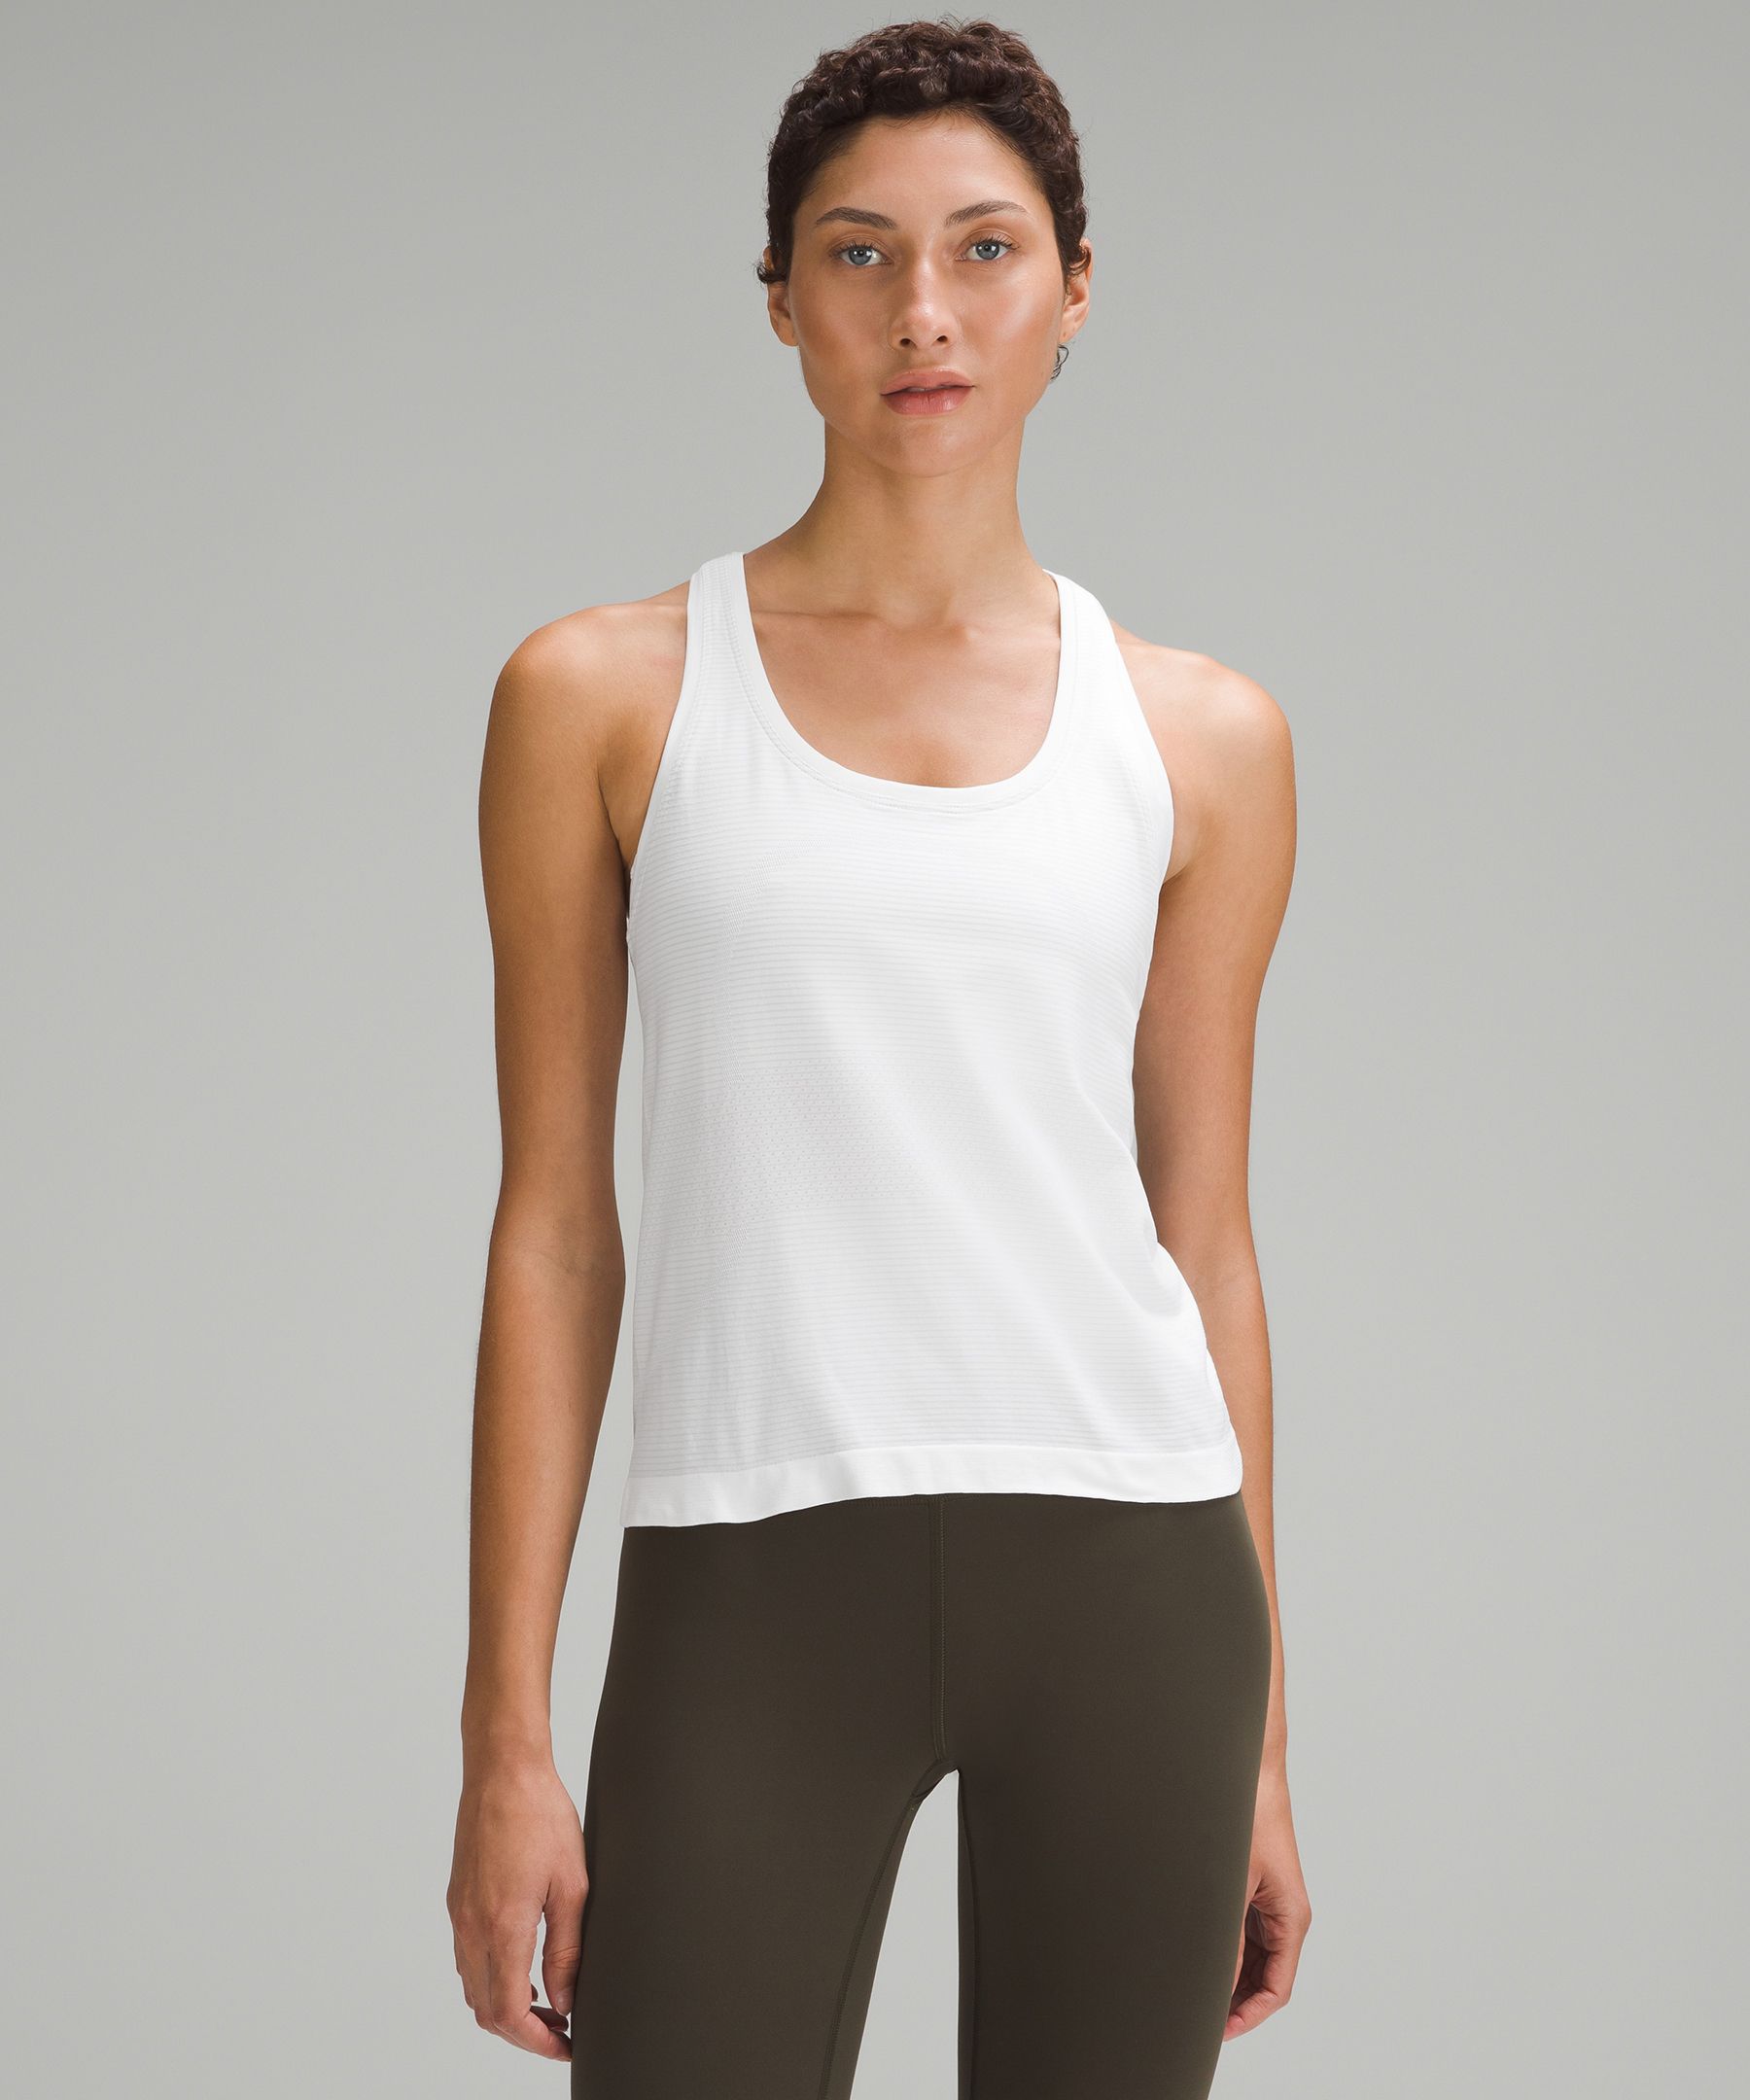 Colorblock Leggings and Mesh Back Tank  Style Squared Clothing - Loubies  and Lulu